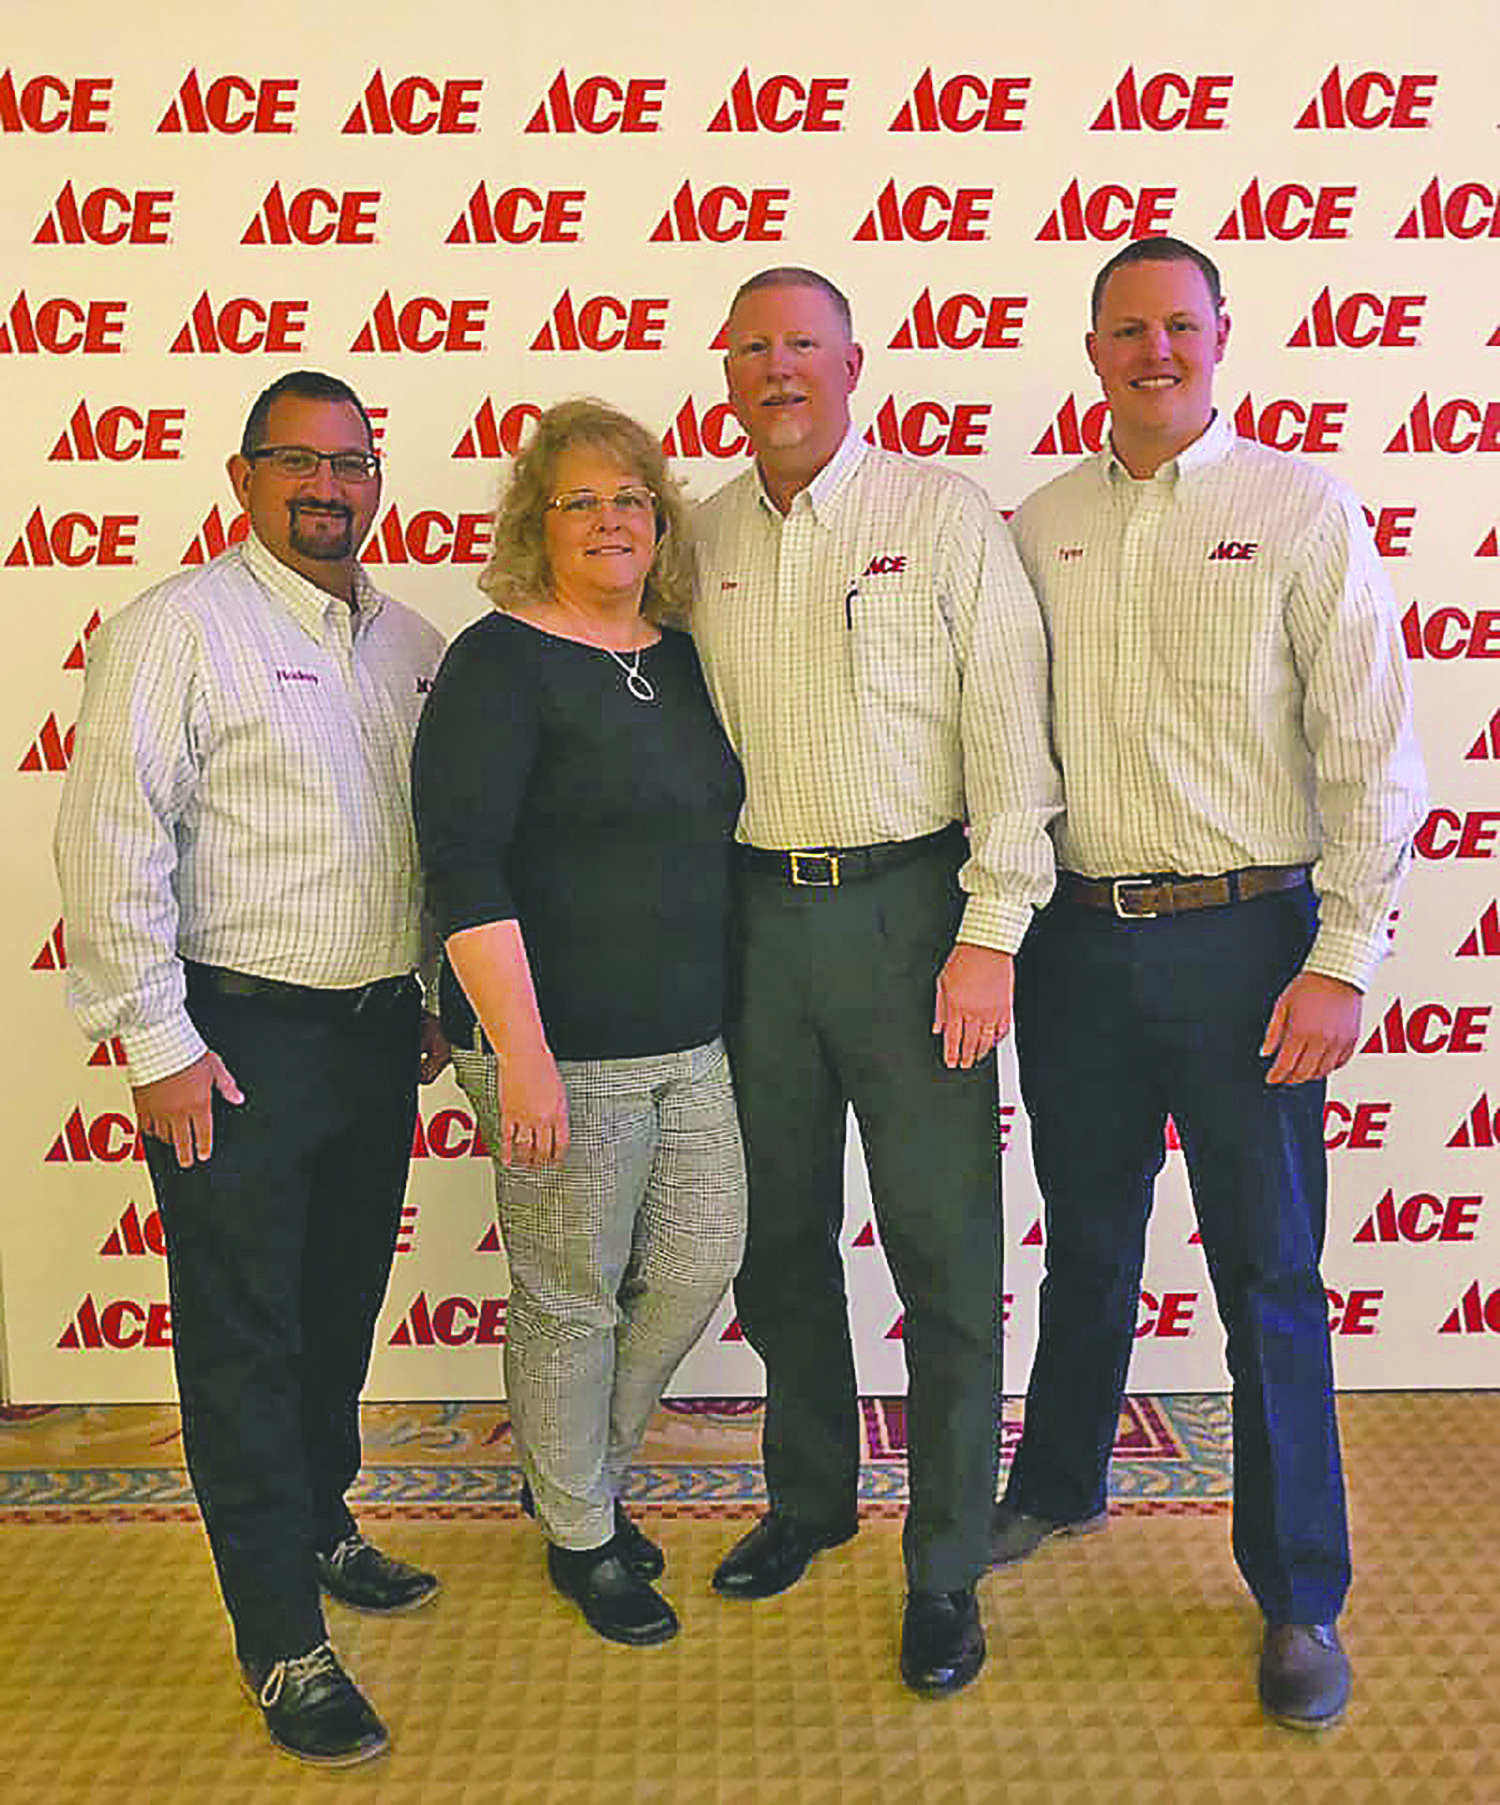 The Helpful Hardware Folks Madison Ace Hardware Continuing With